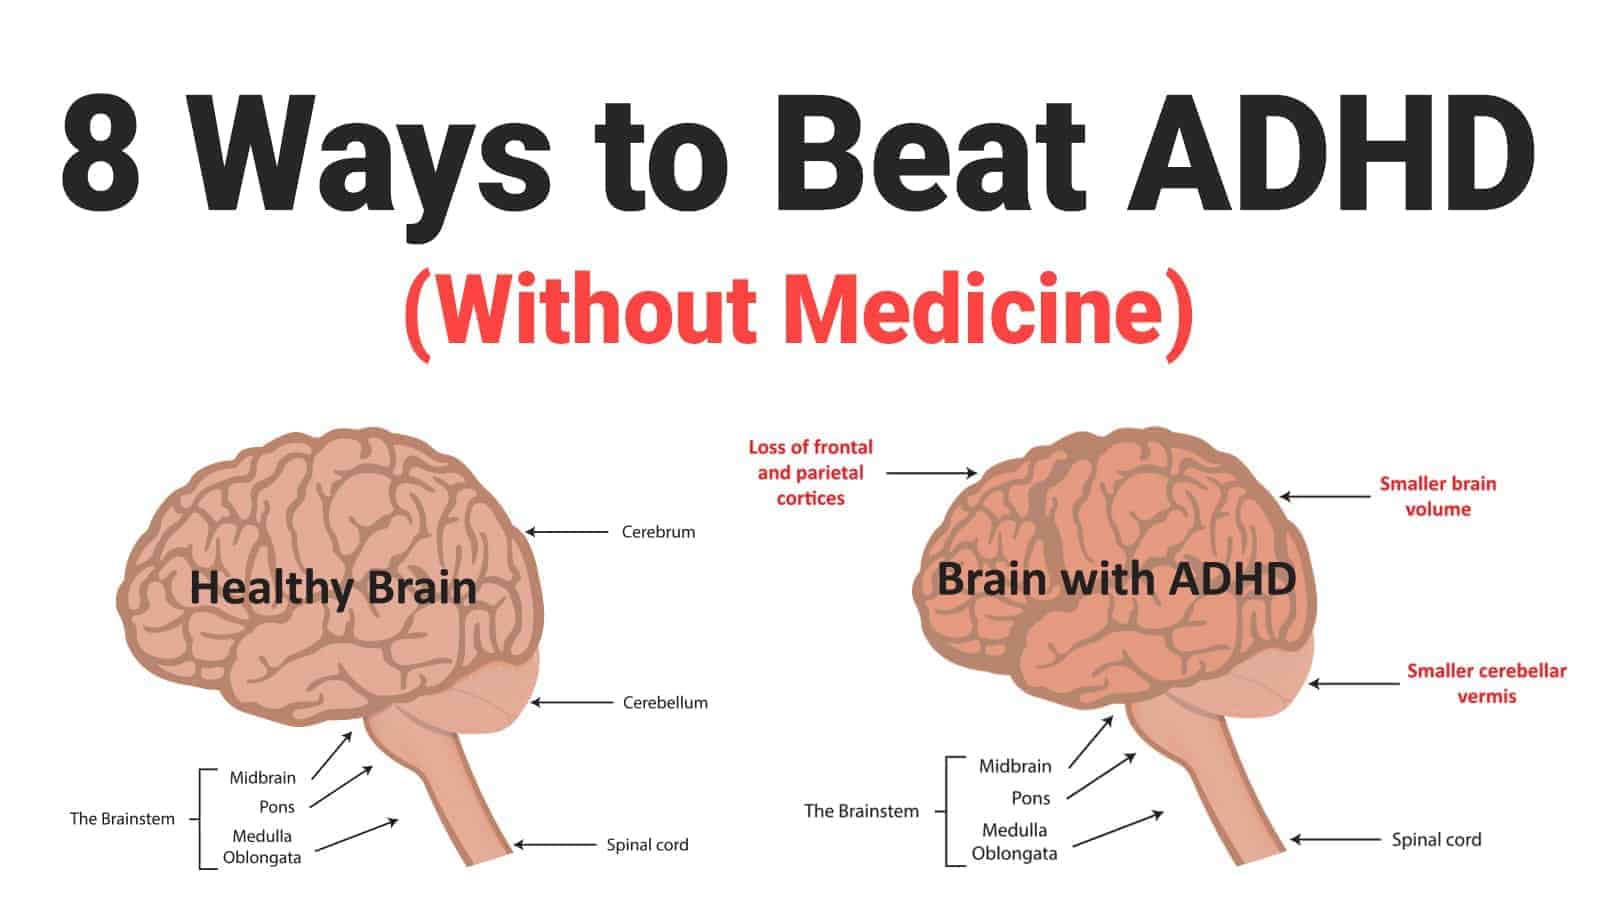 8 Ways to Beat ADHD (Without Medicine)